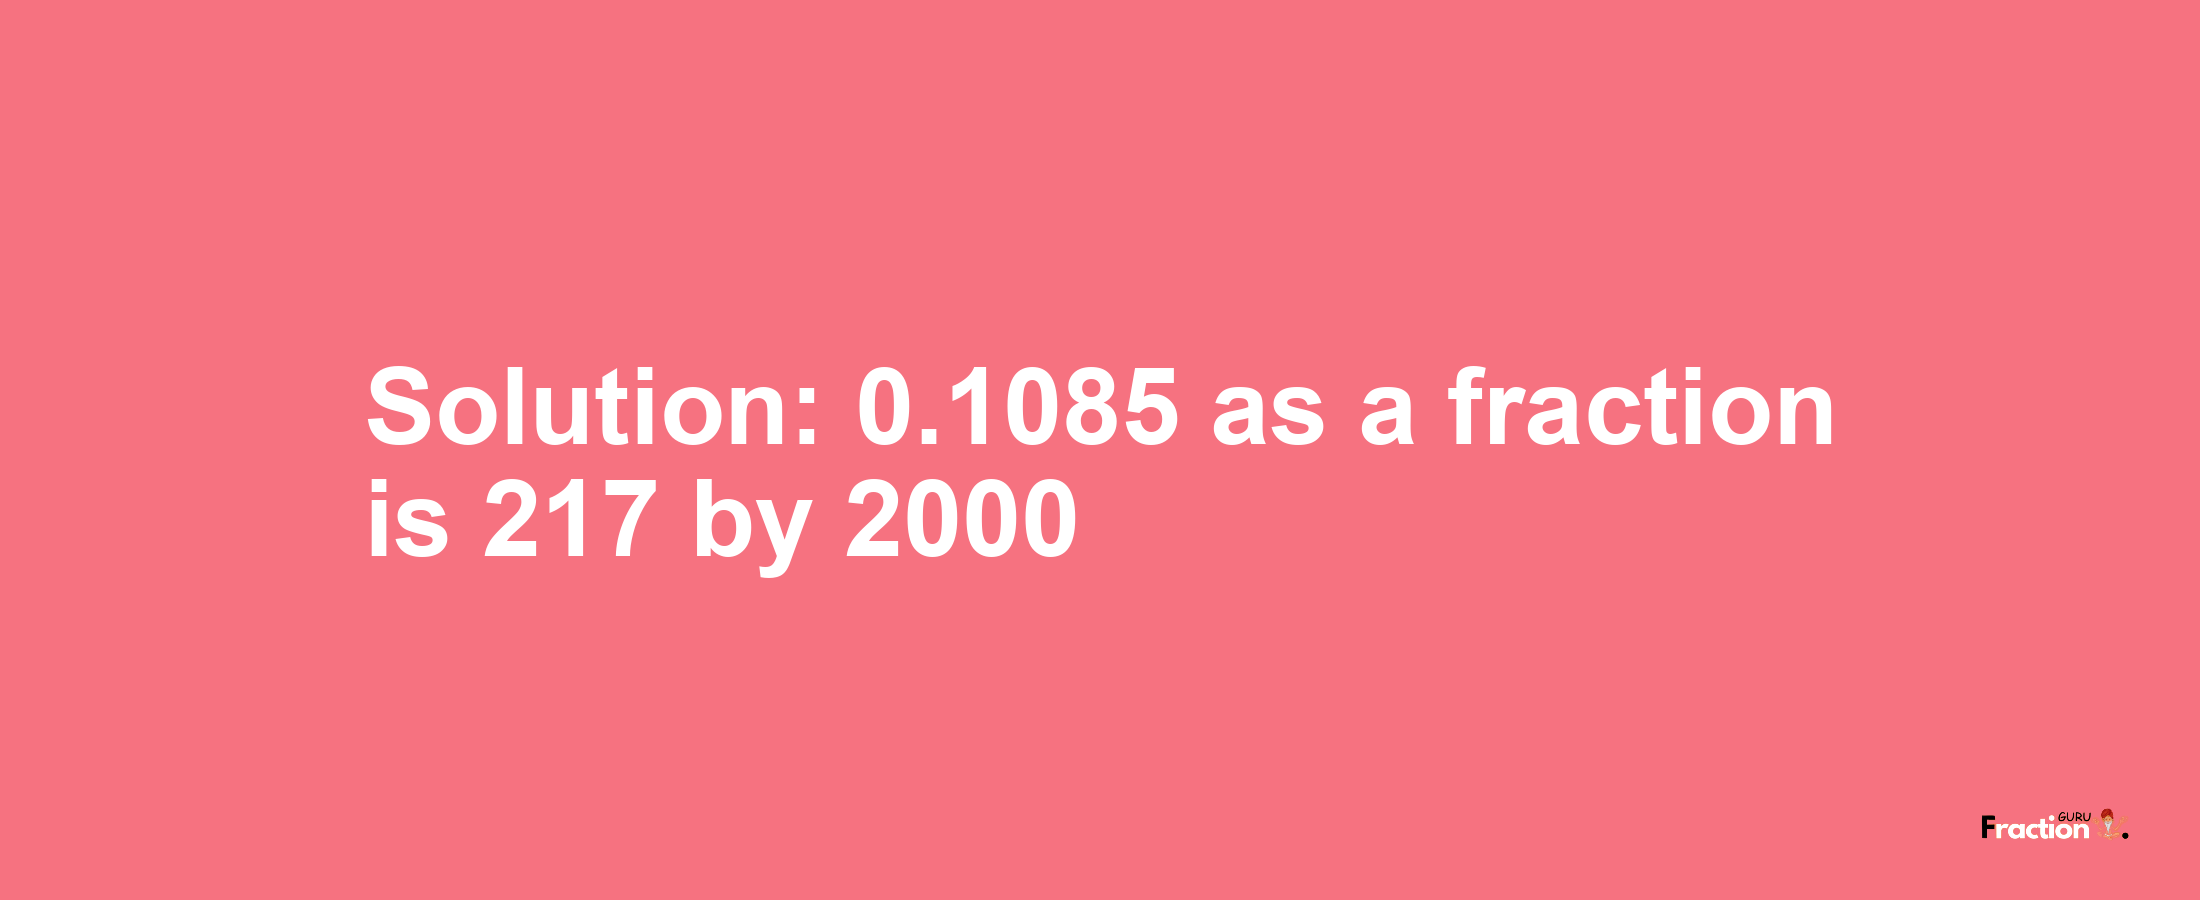 Solution:0.1085 as a fraction is 217/2000